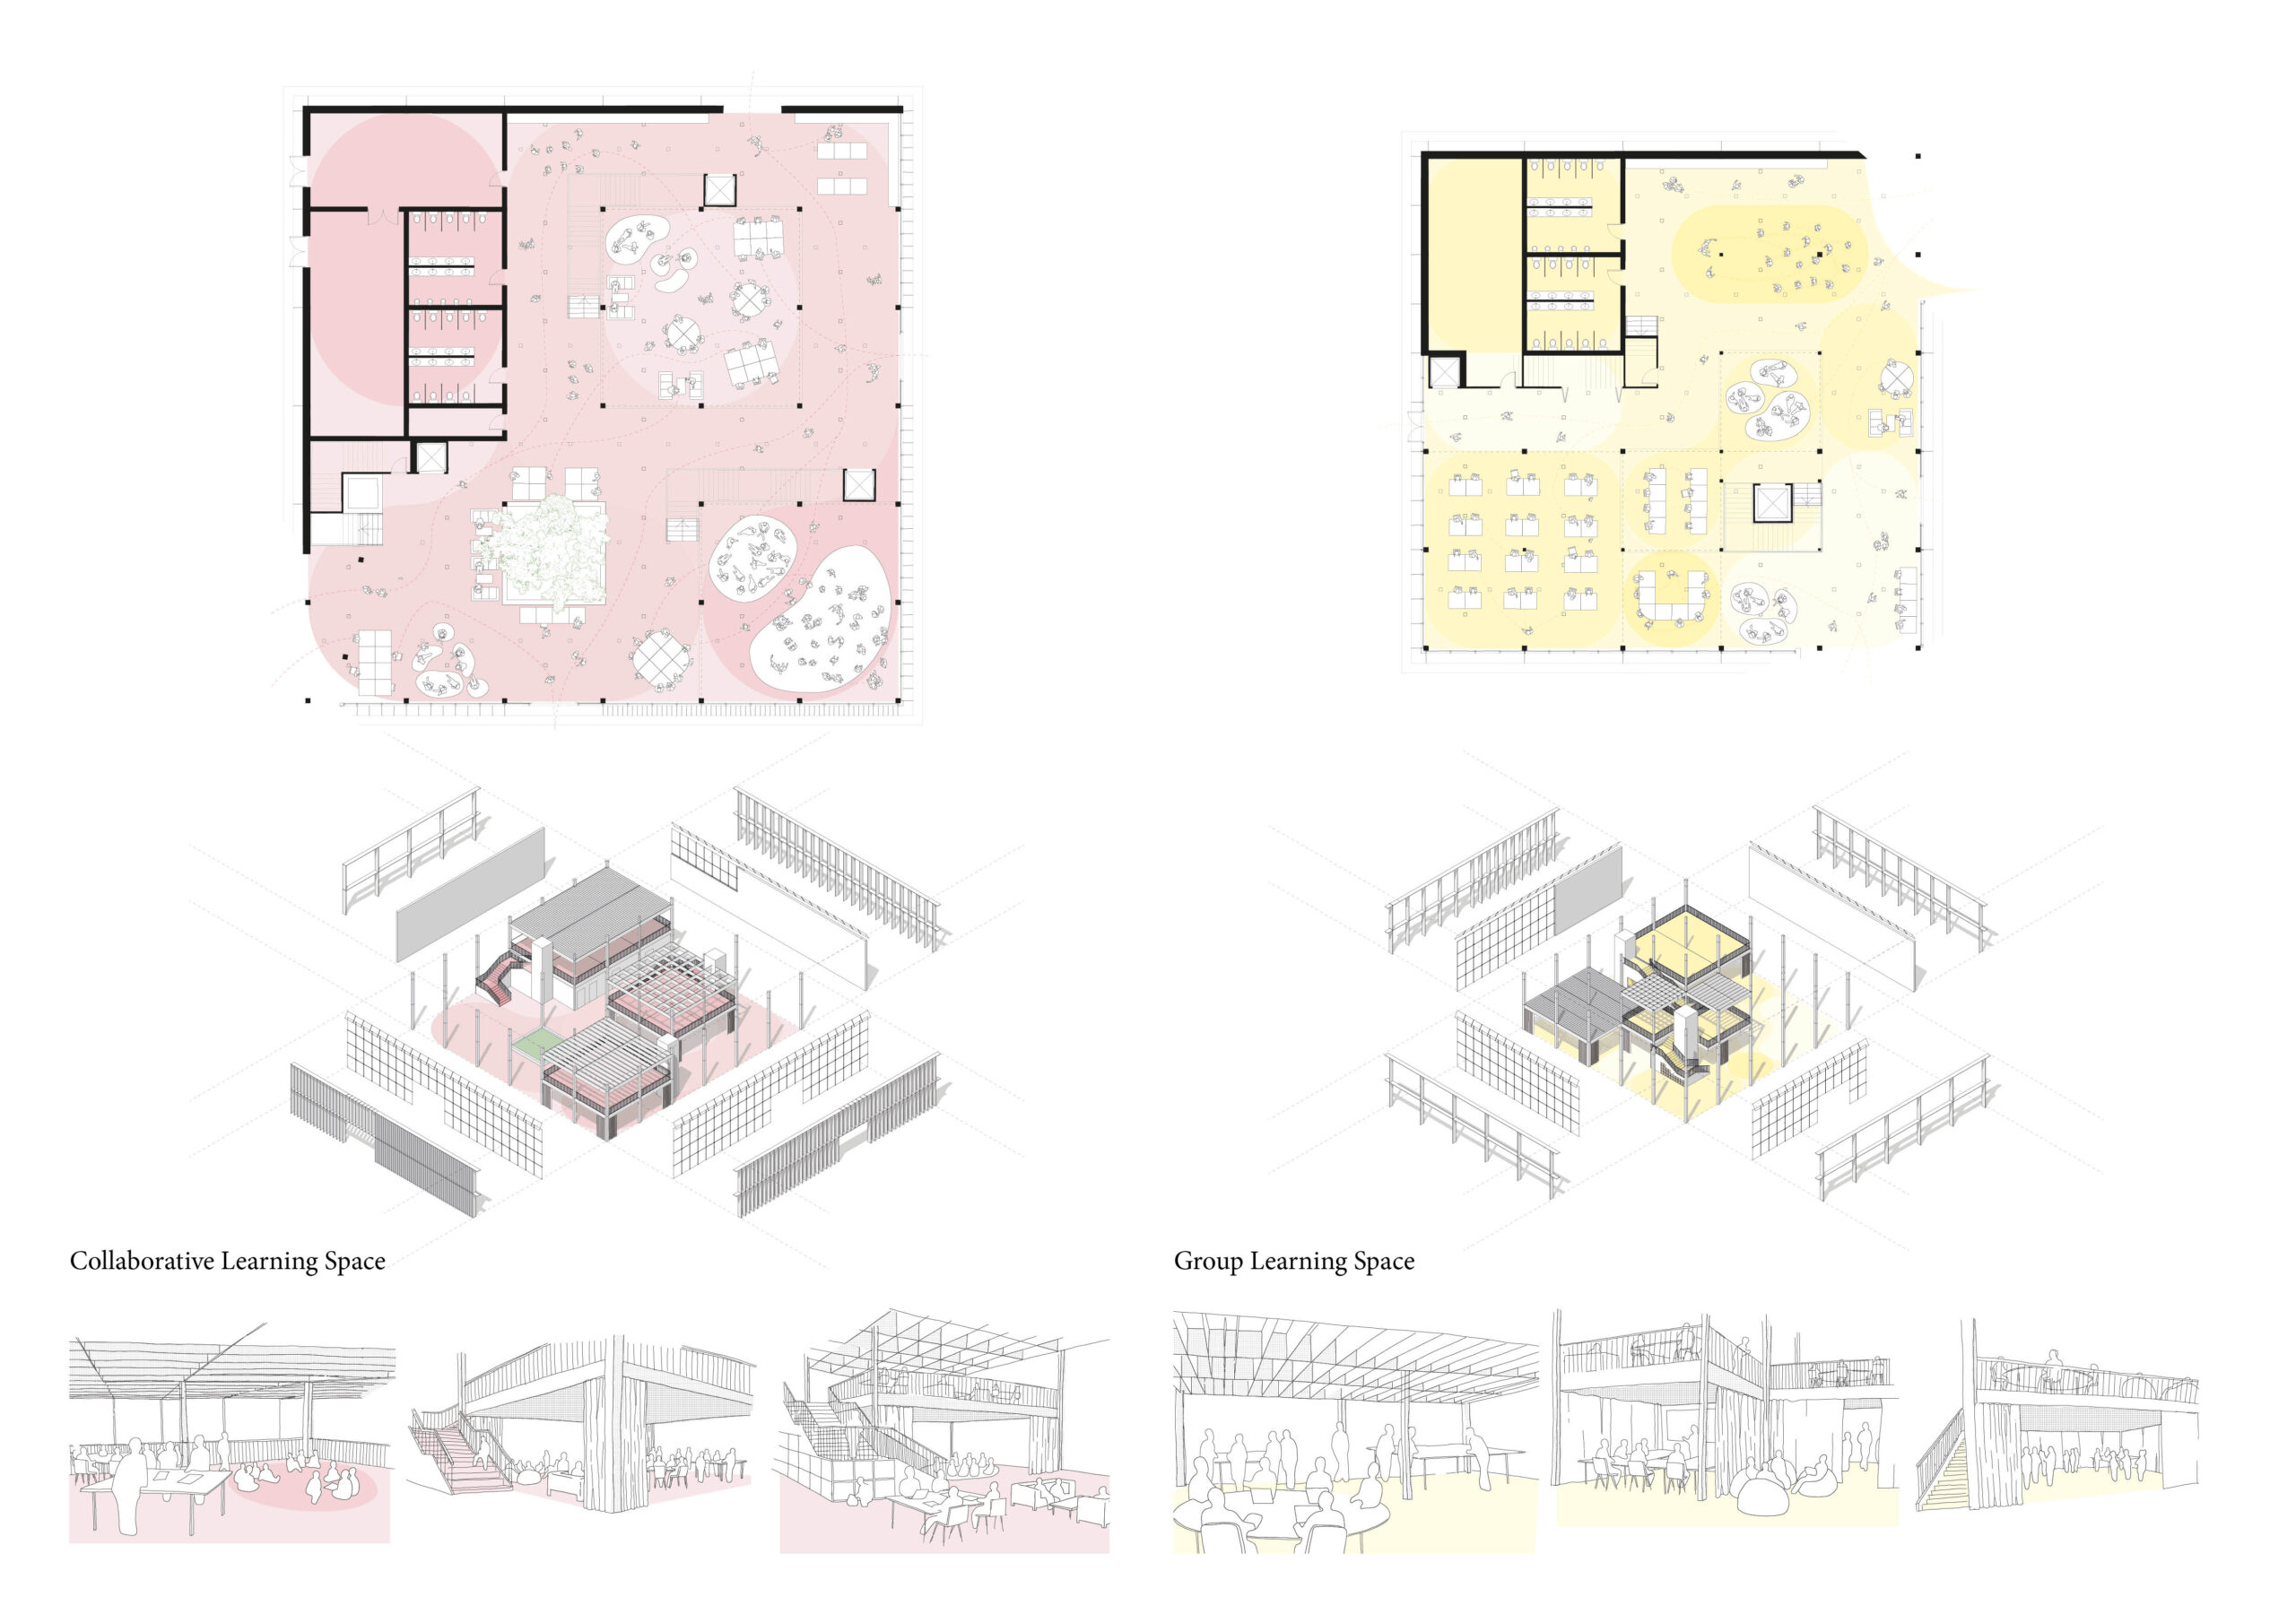 Portfolio Page of the Collaborative and Group Learning Spaces, with plans, axonometric drawings and perspectives.